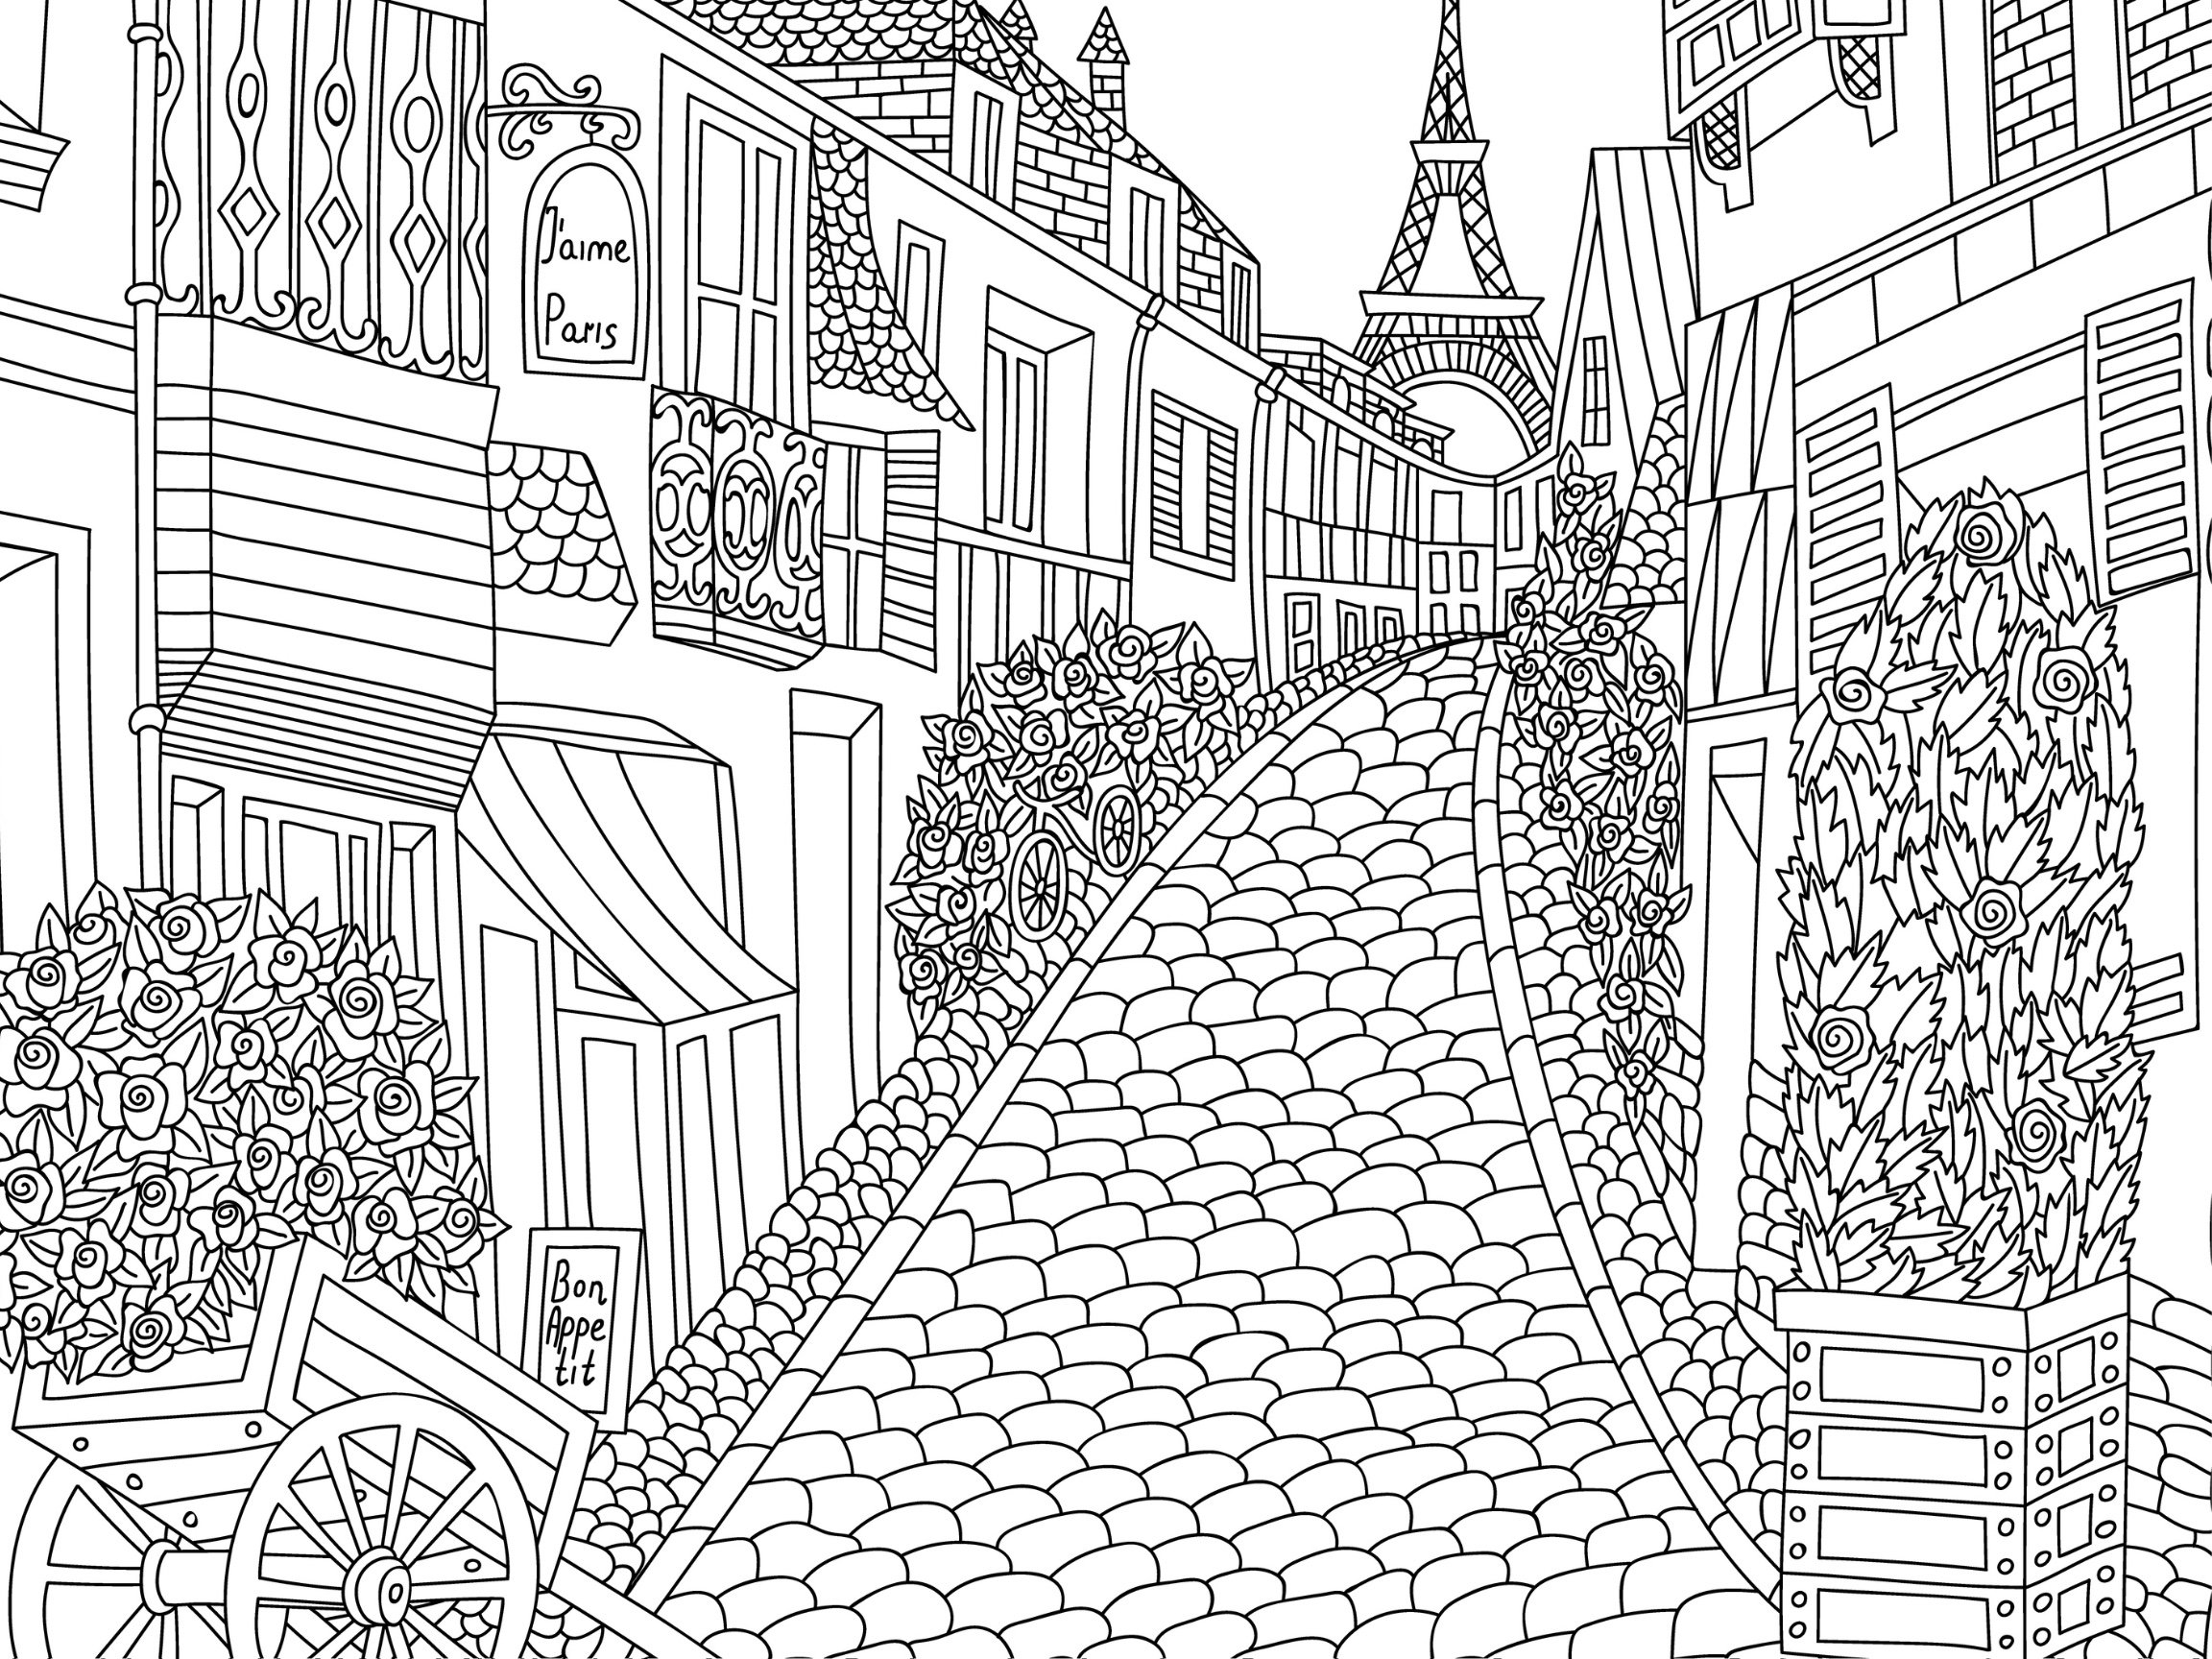 64 pages Around The World Japan Greece Colouring Book France Paris